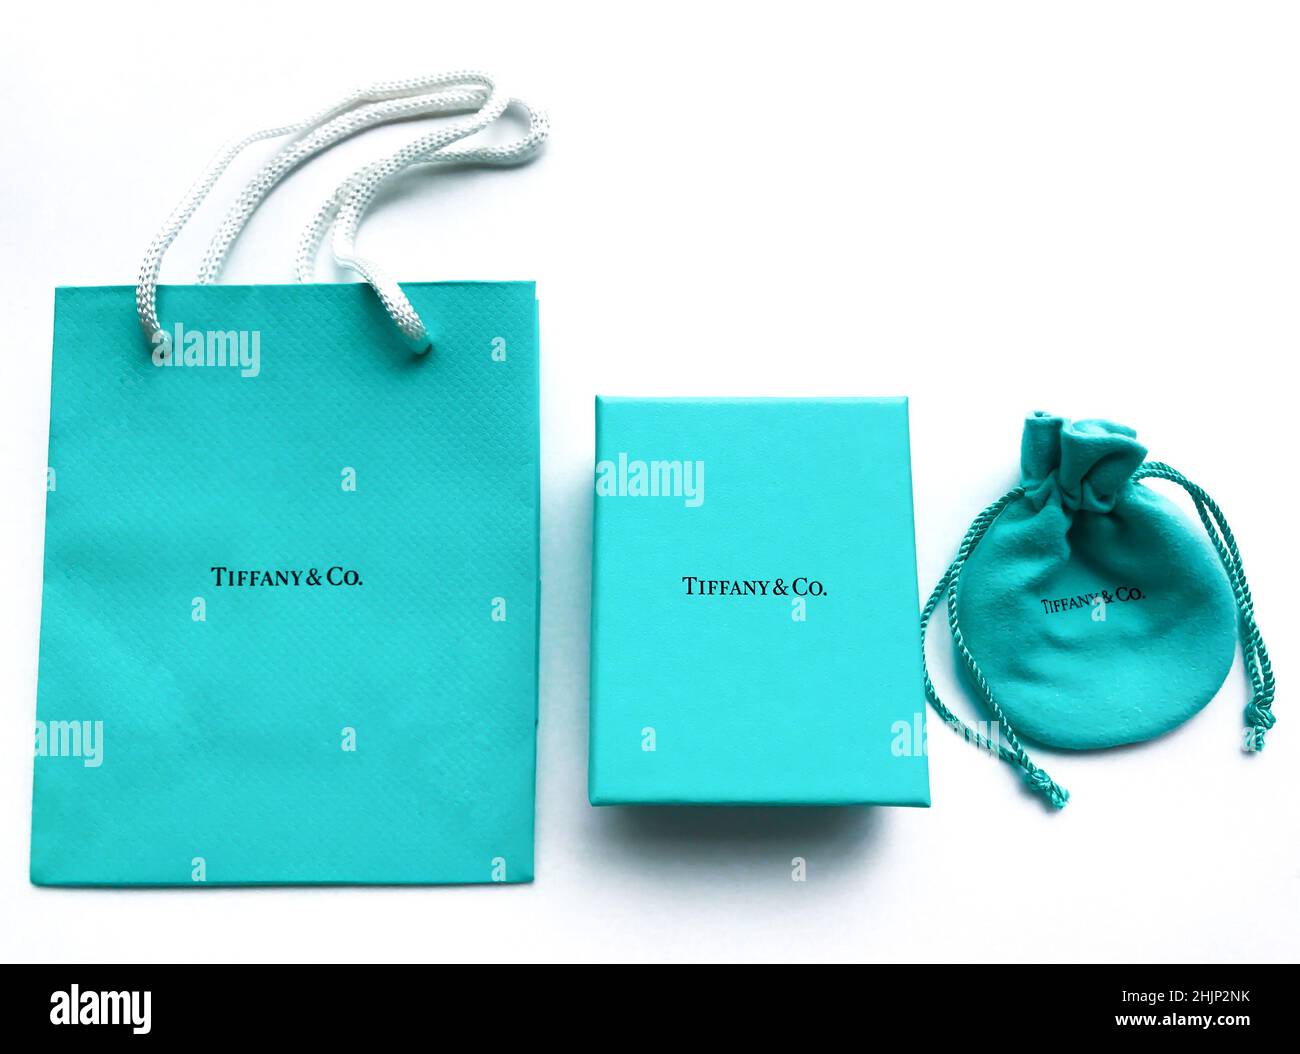 Tiffany & Co. Square Box & Button Pouch Packaging